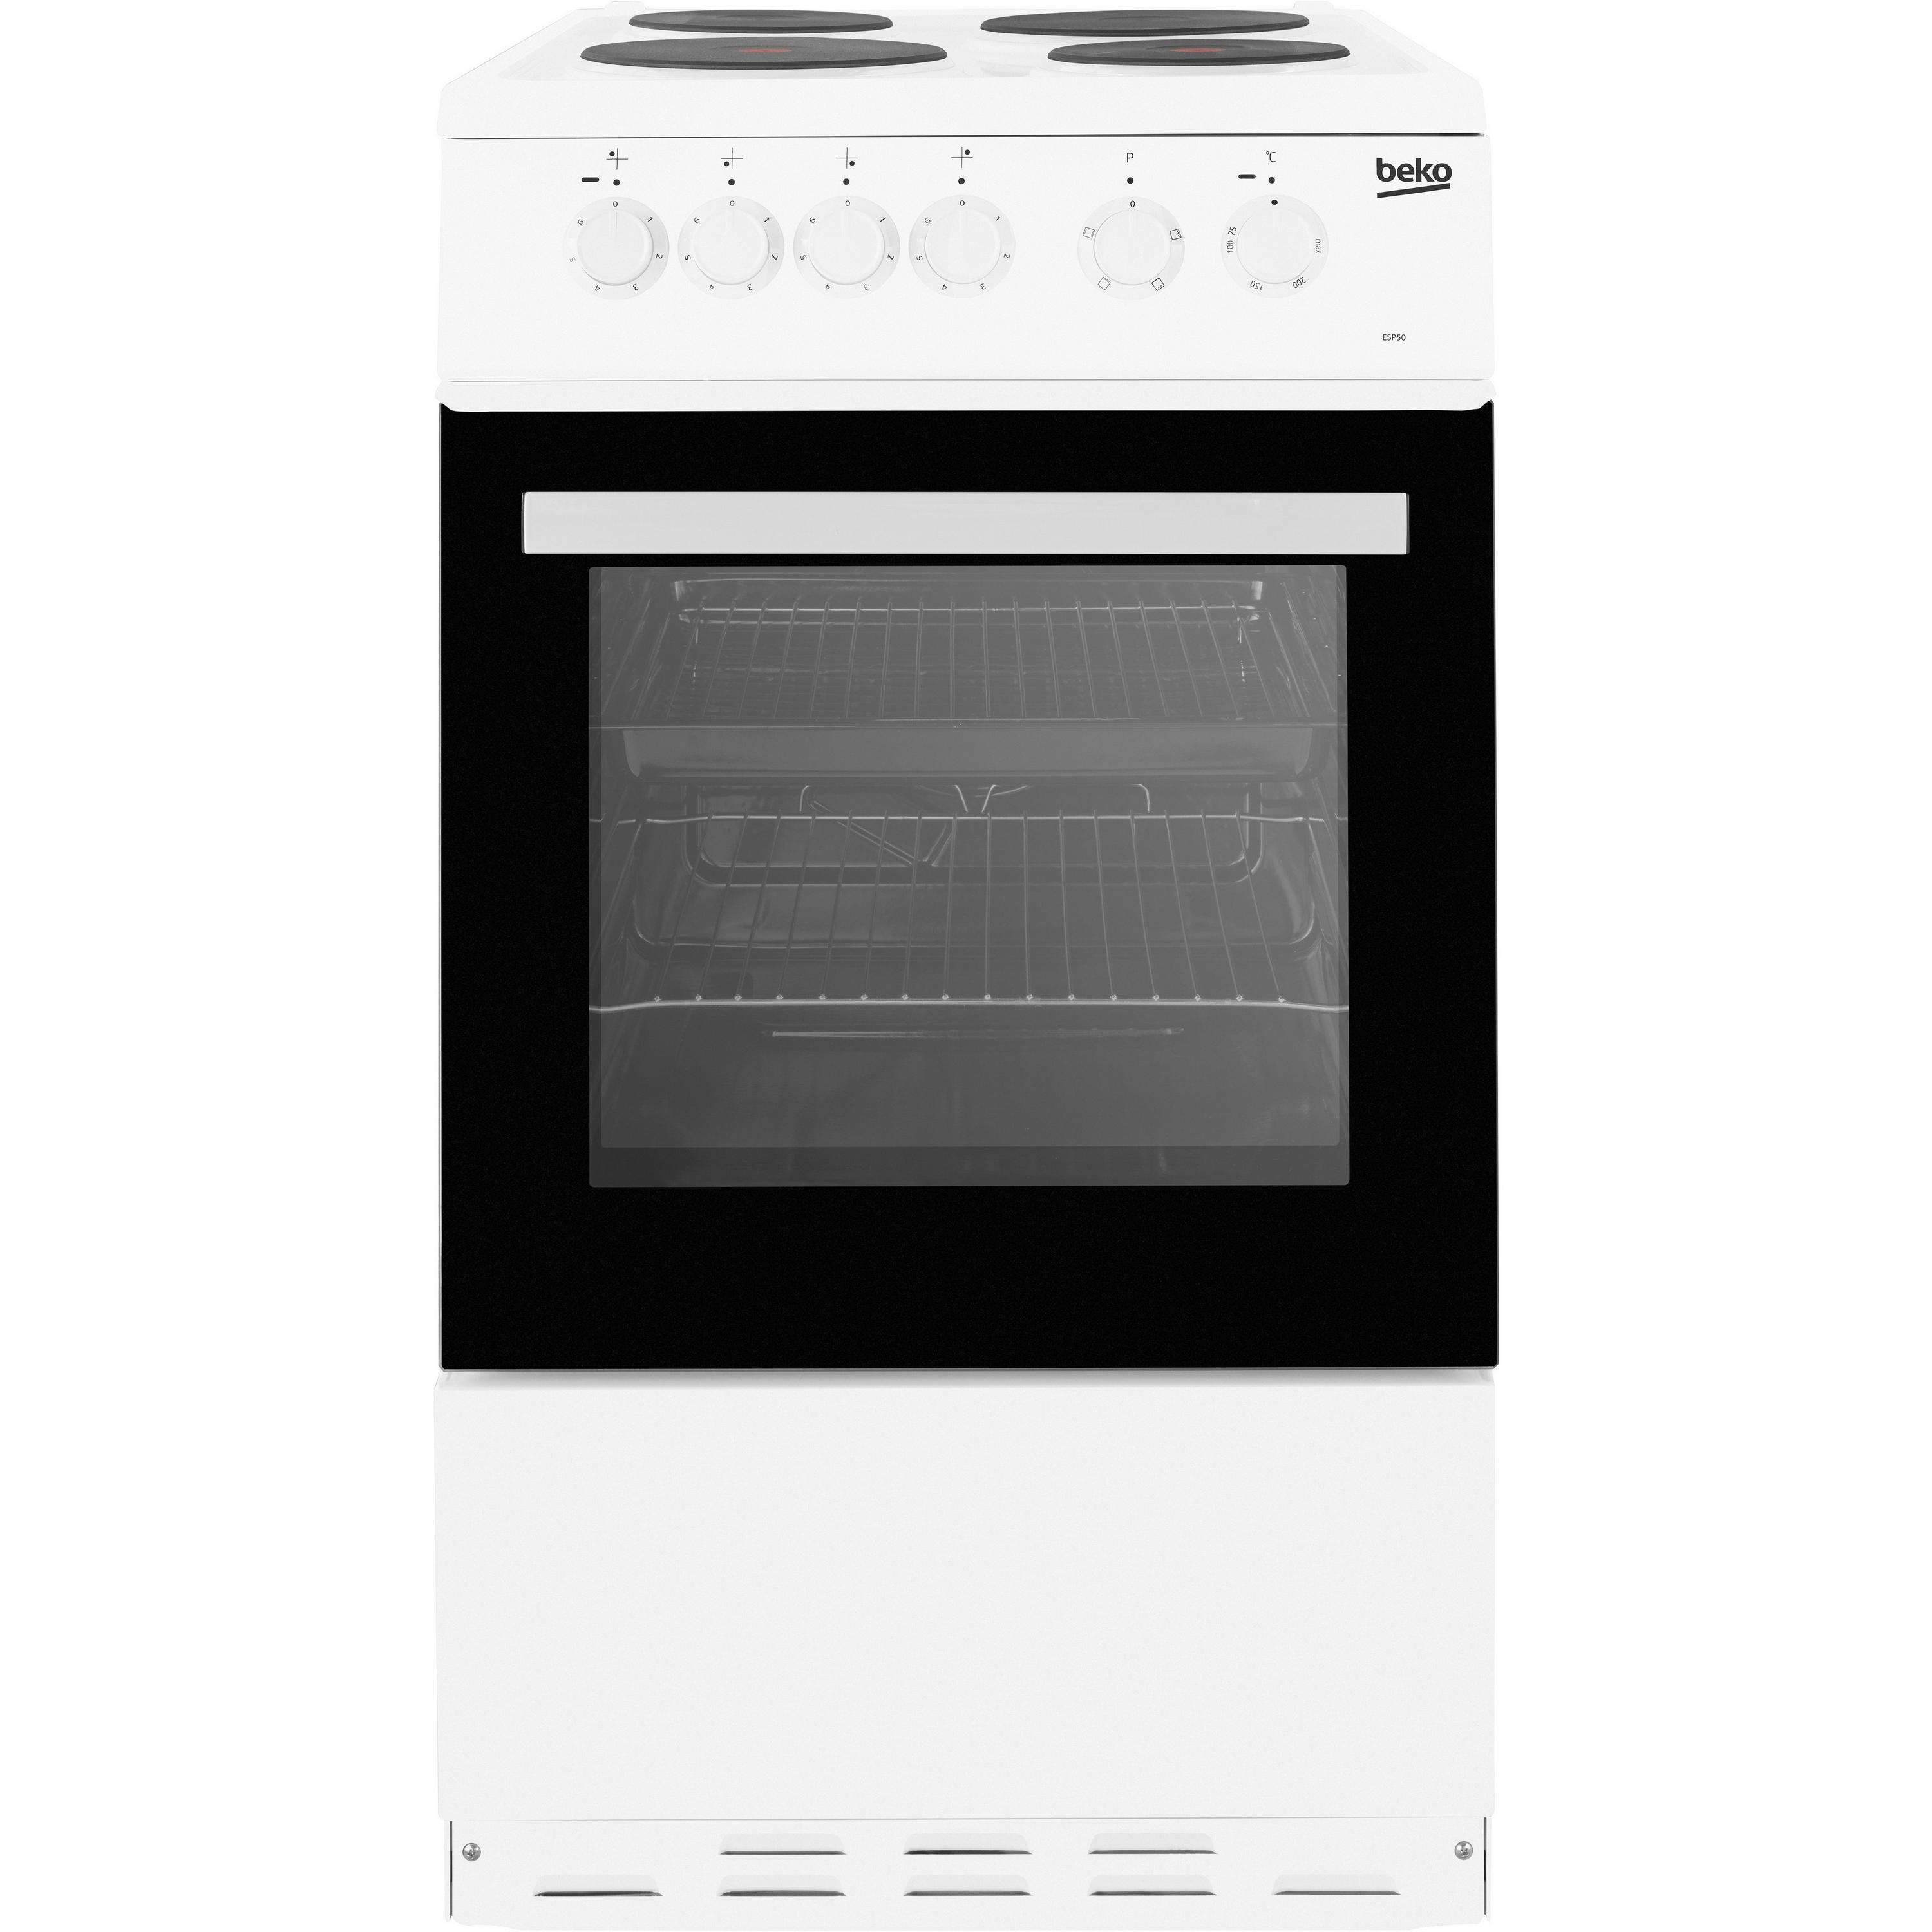 Image of Beko ESP50W 50cm Single Oven Electric Cooker in White Solid Plate